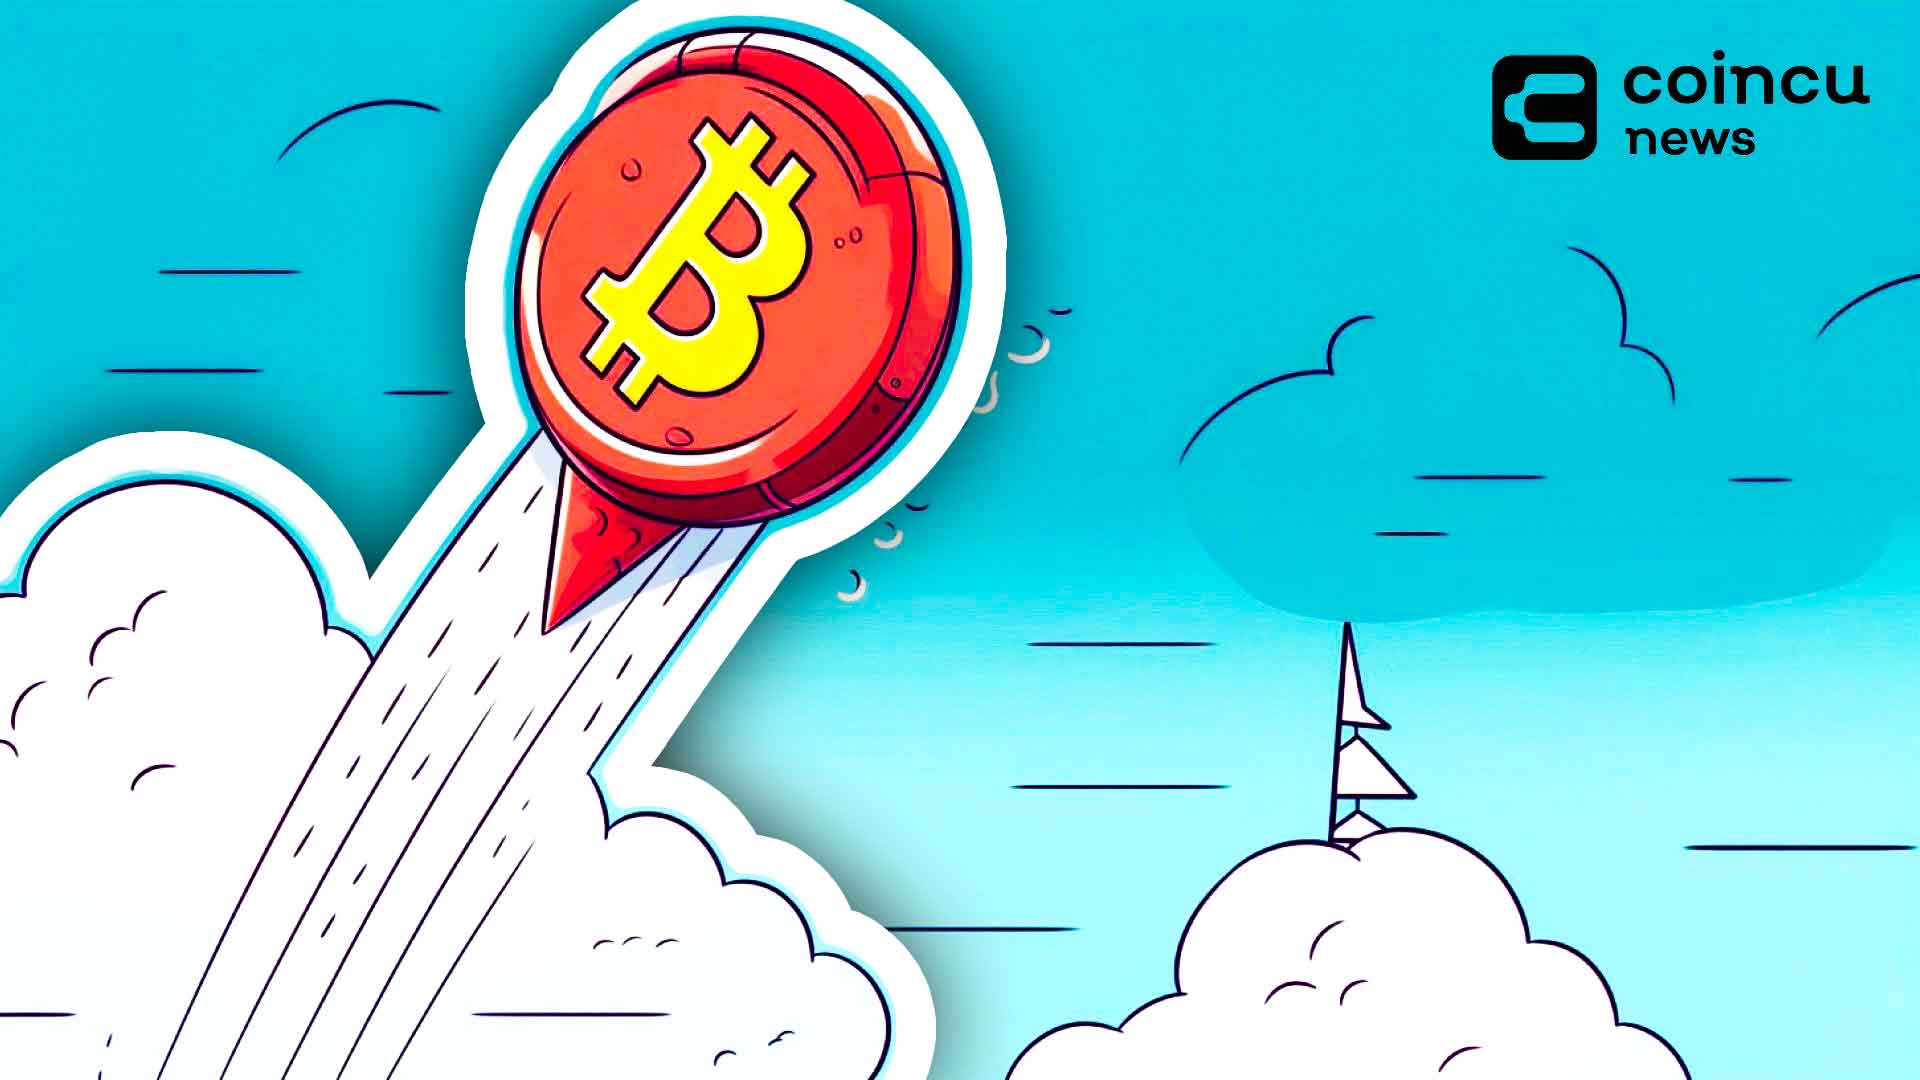 Bernstein Analysts Raised Bitcoin Price Target At The End Of 2024 To $90,000